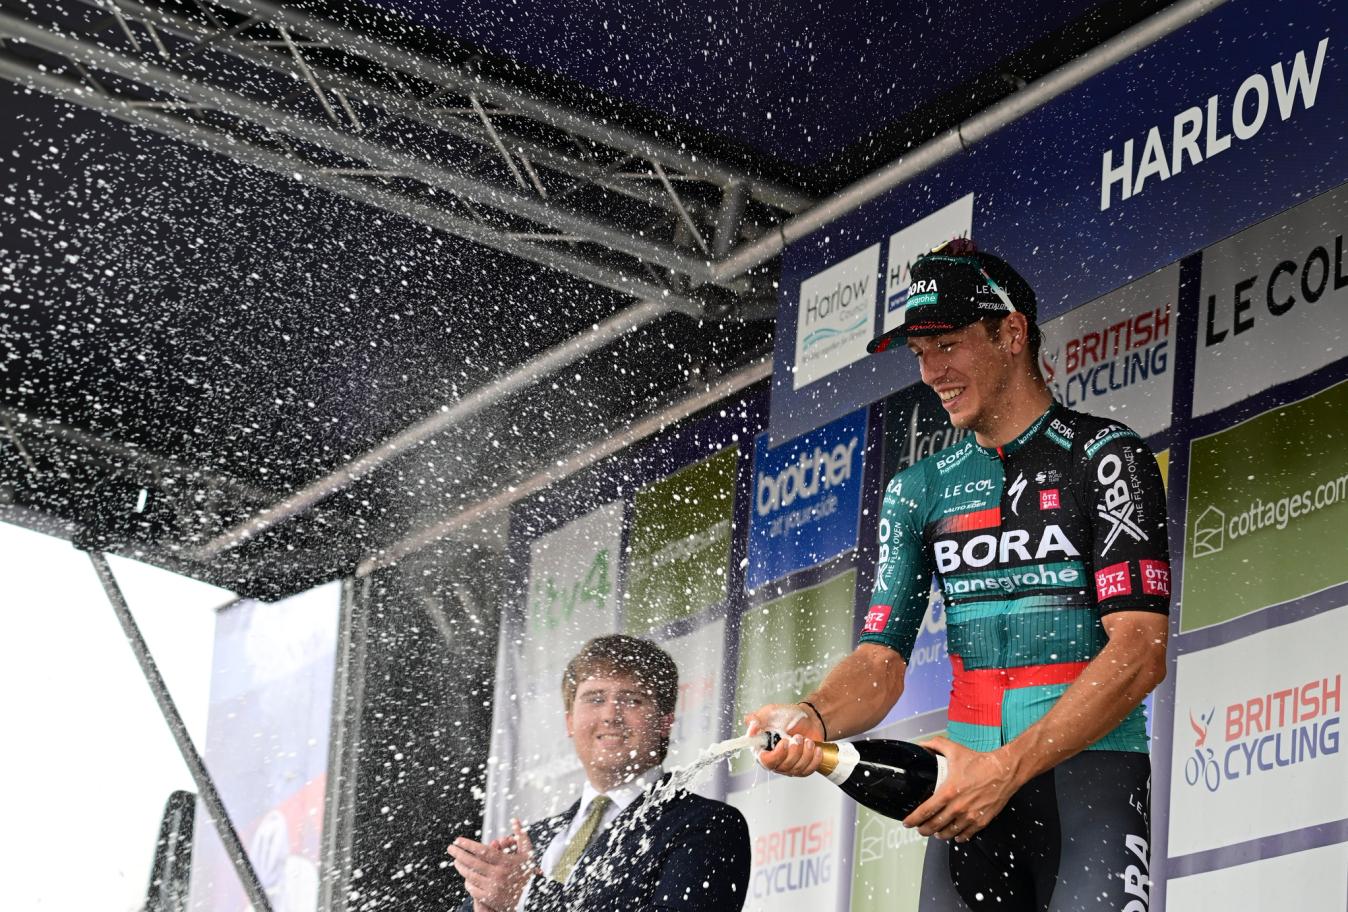 Danny van Poppel had been the rider who had pushed Jumbo-Visma the closest in the opening five stages